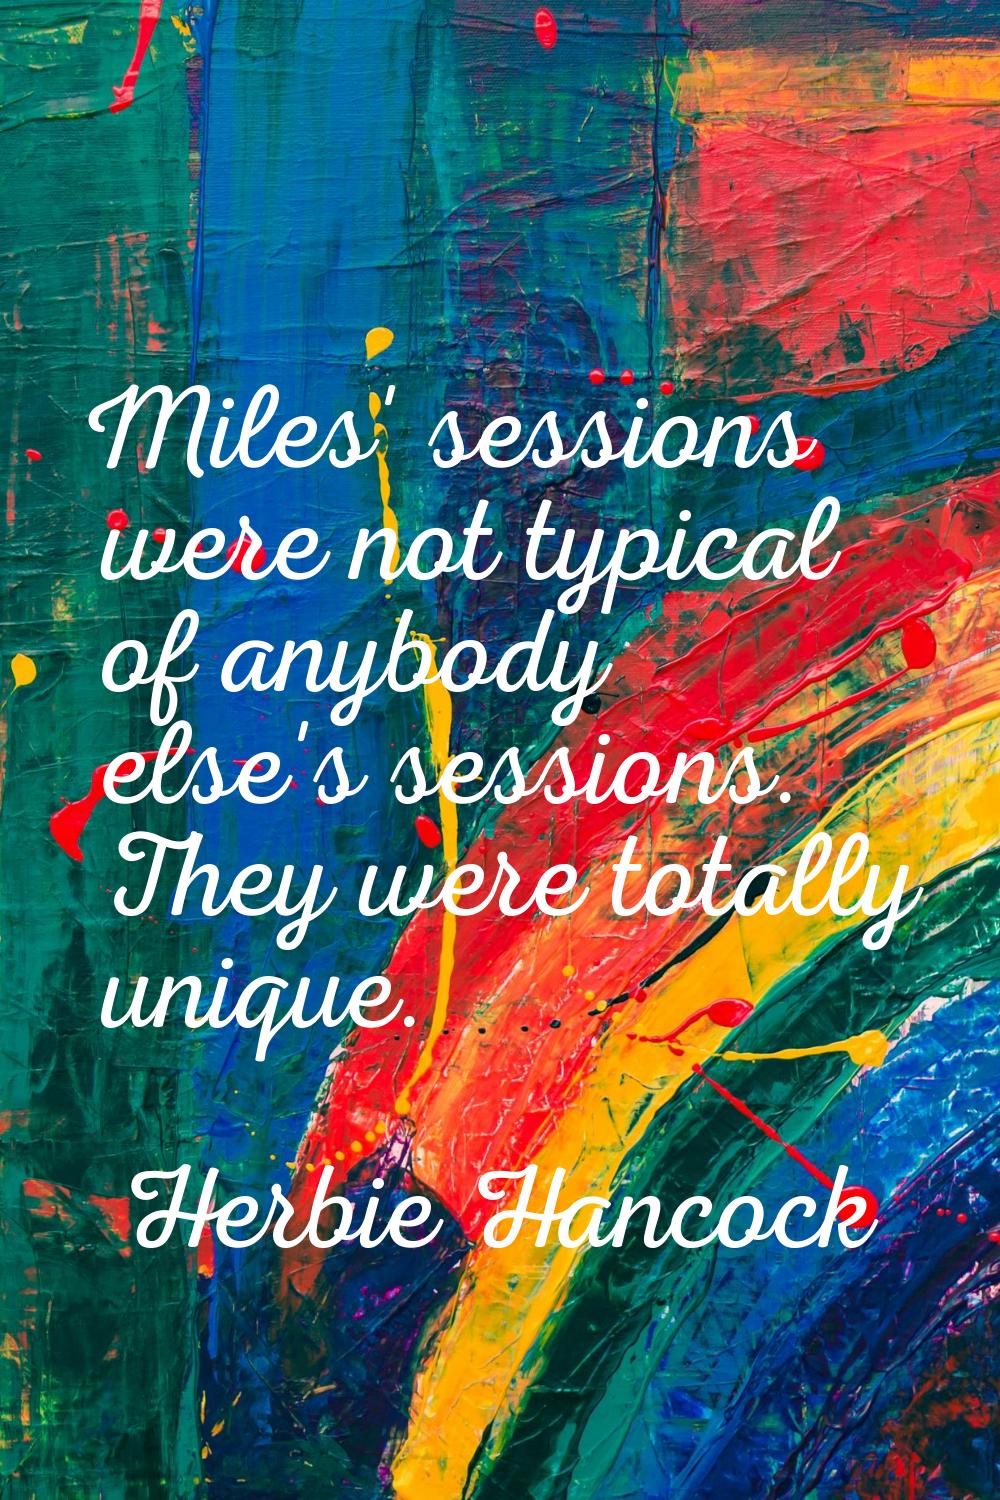 Miles' sessions were not typical of anybody else's sessions. They were totally unique.